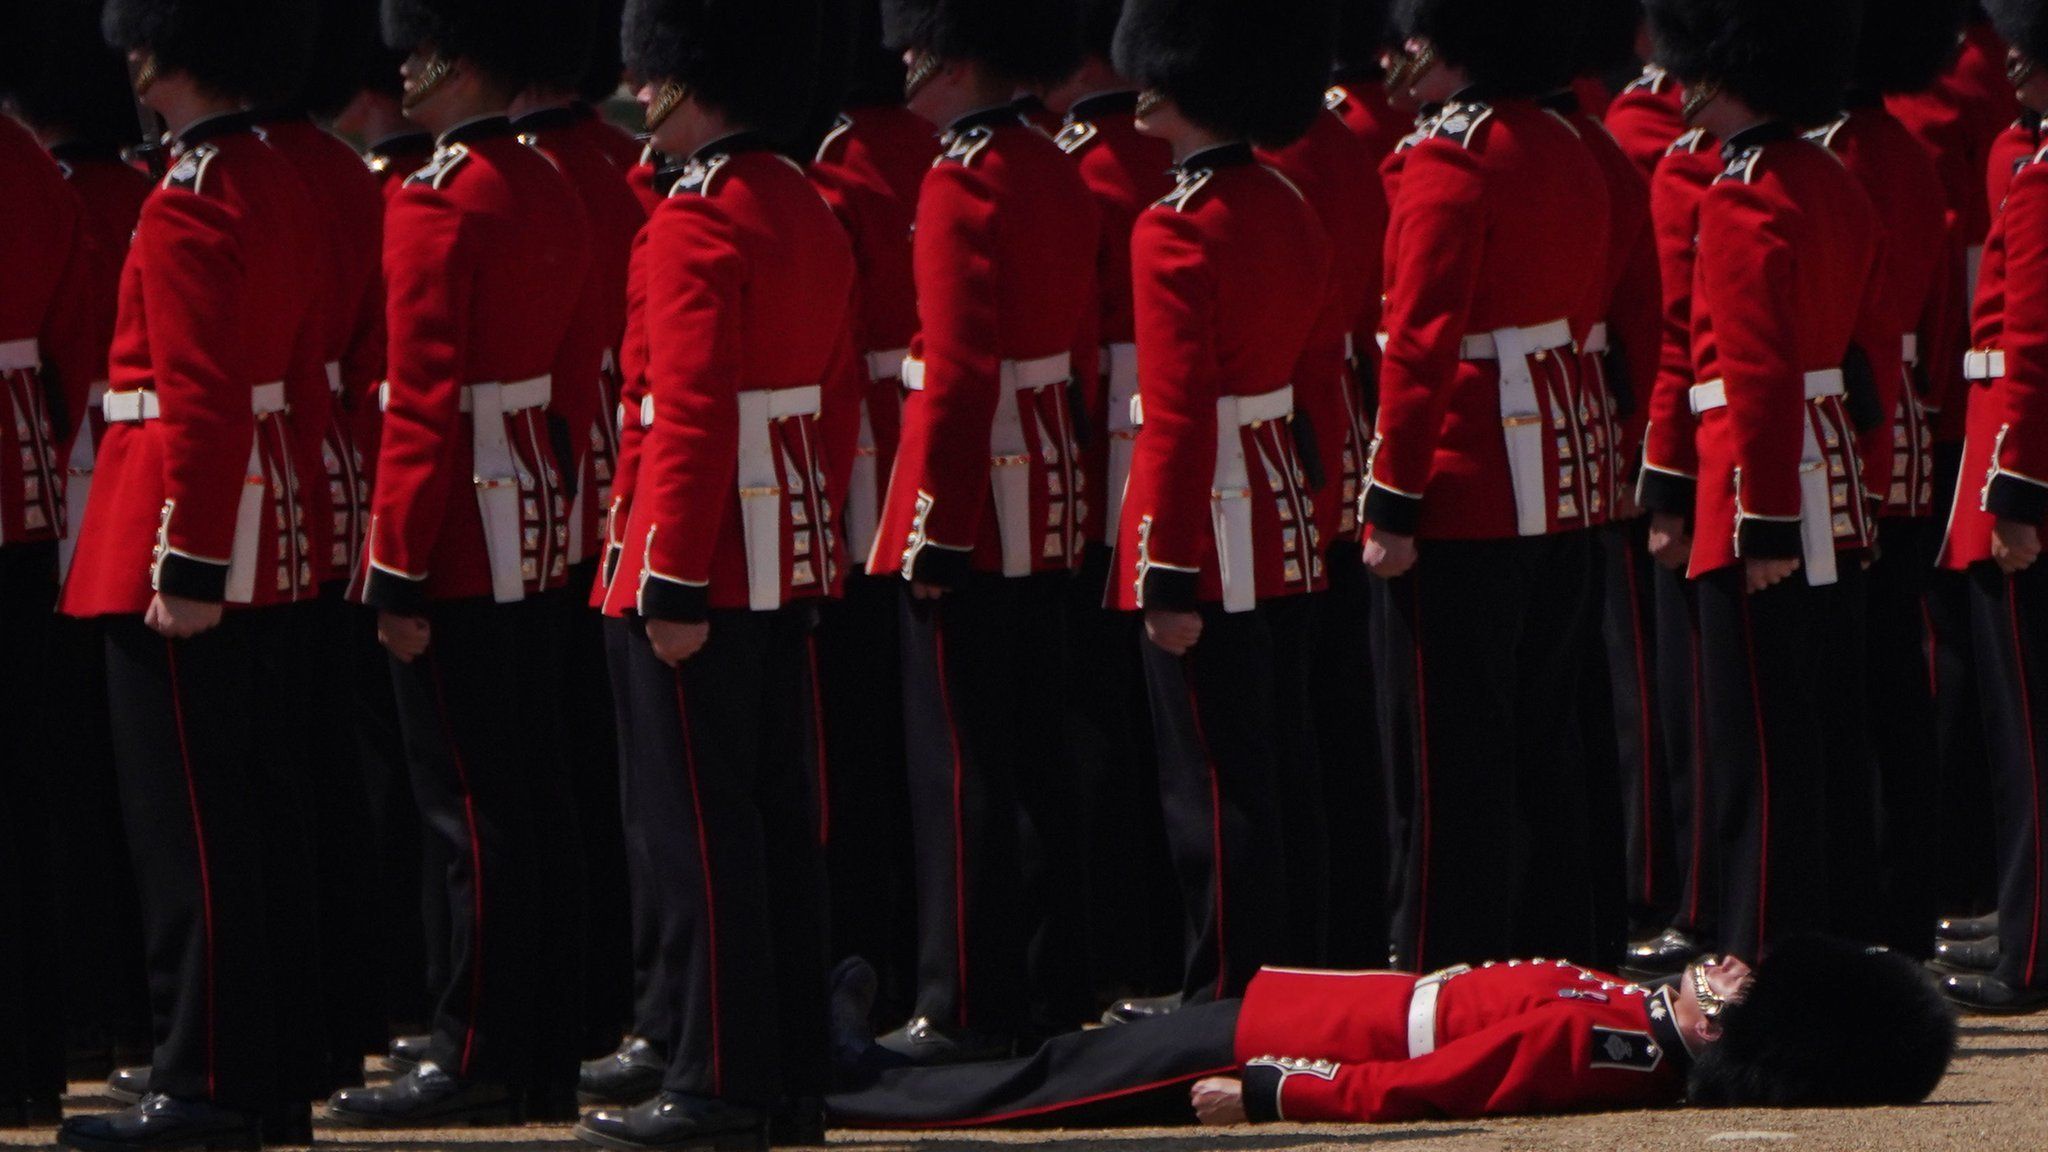 A member of the military faints during the Colonel's Review, for Trooping the Colour, at Horse Guards Parade in London, ahead of the King's Birthday Parade next Saturday